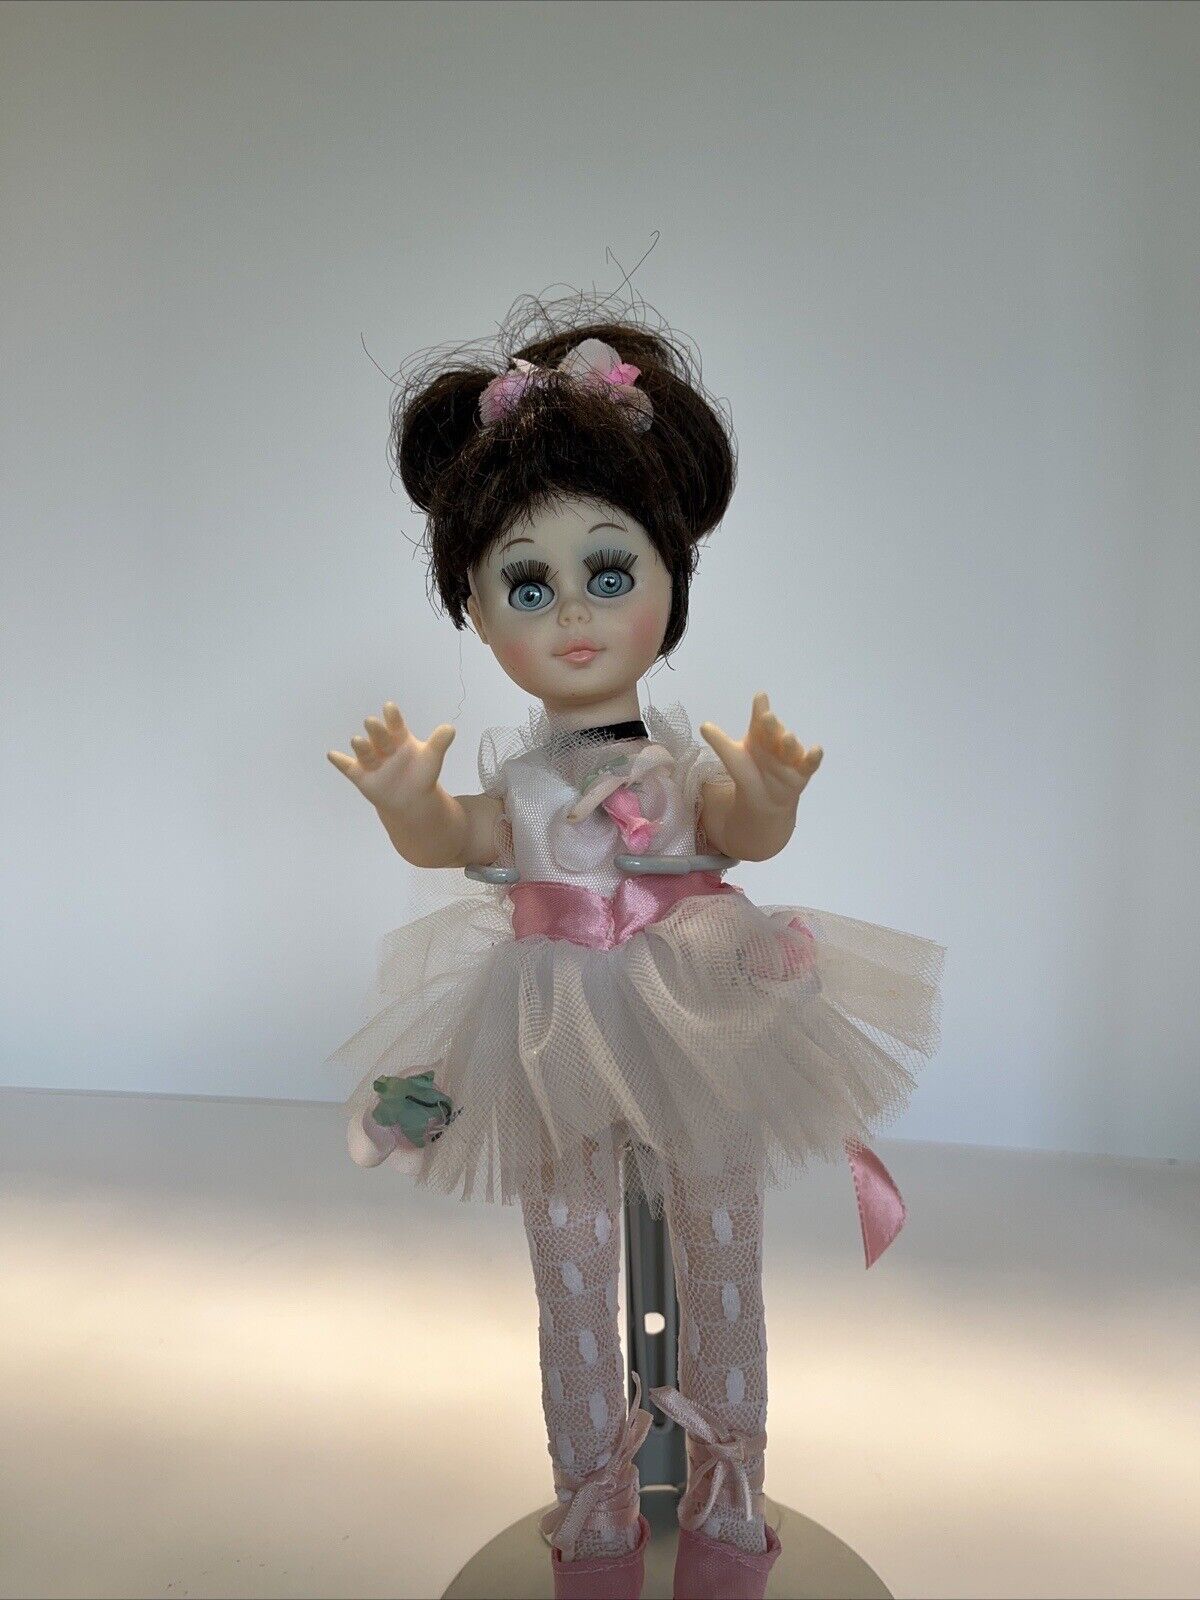 Vintage Margot Doll by Kehagias made in Canada 8”